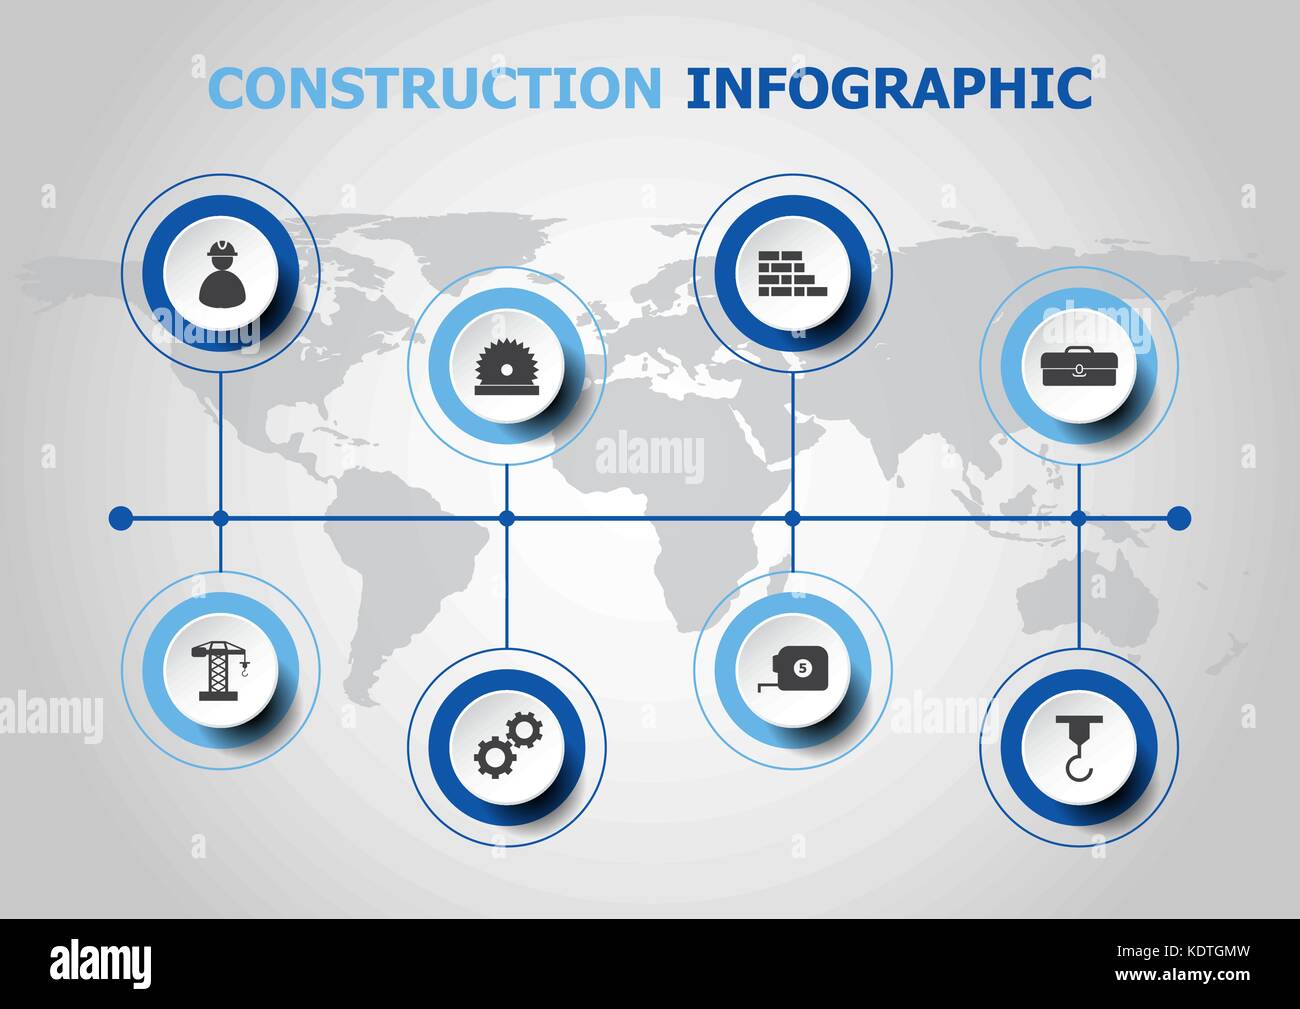 Infographic design with construction icons, stock vector Stock Vector